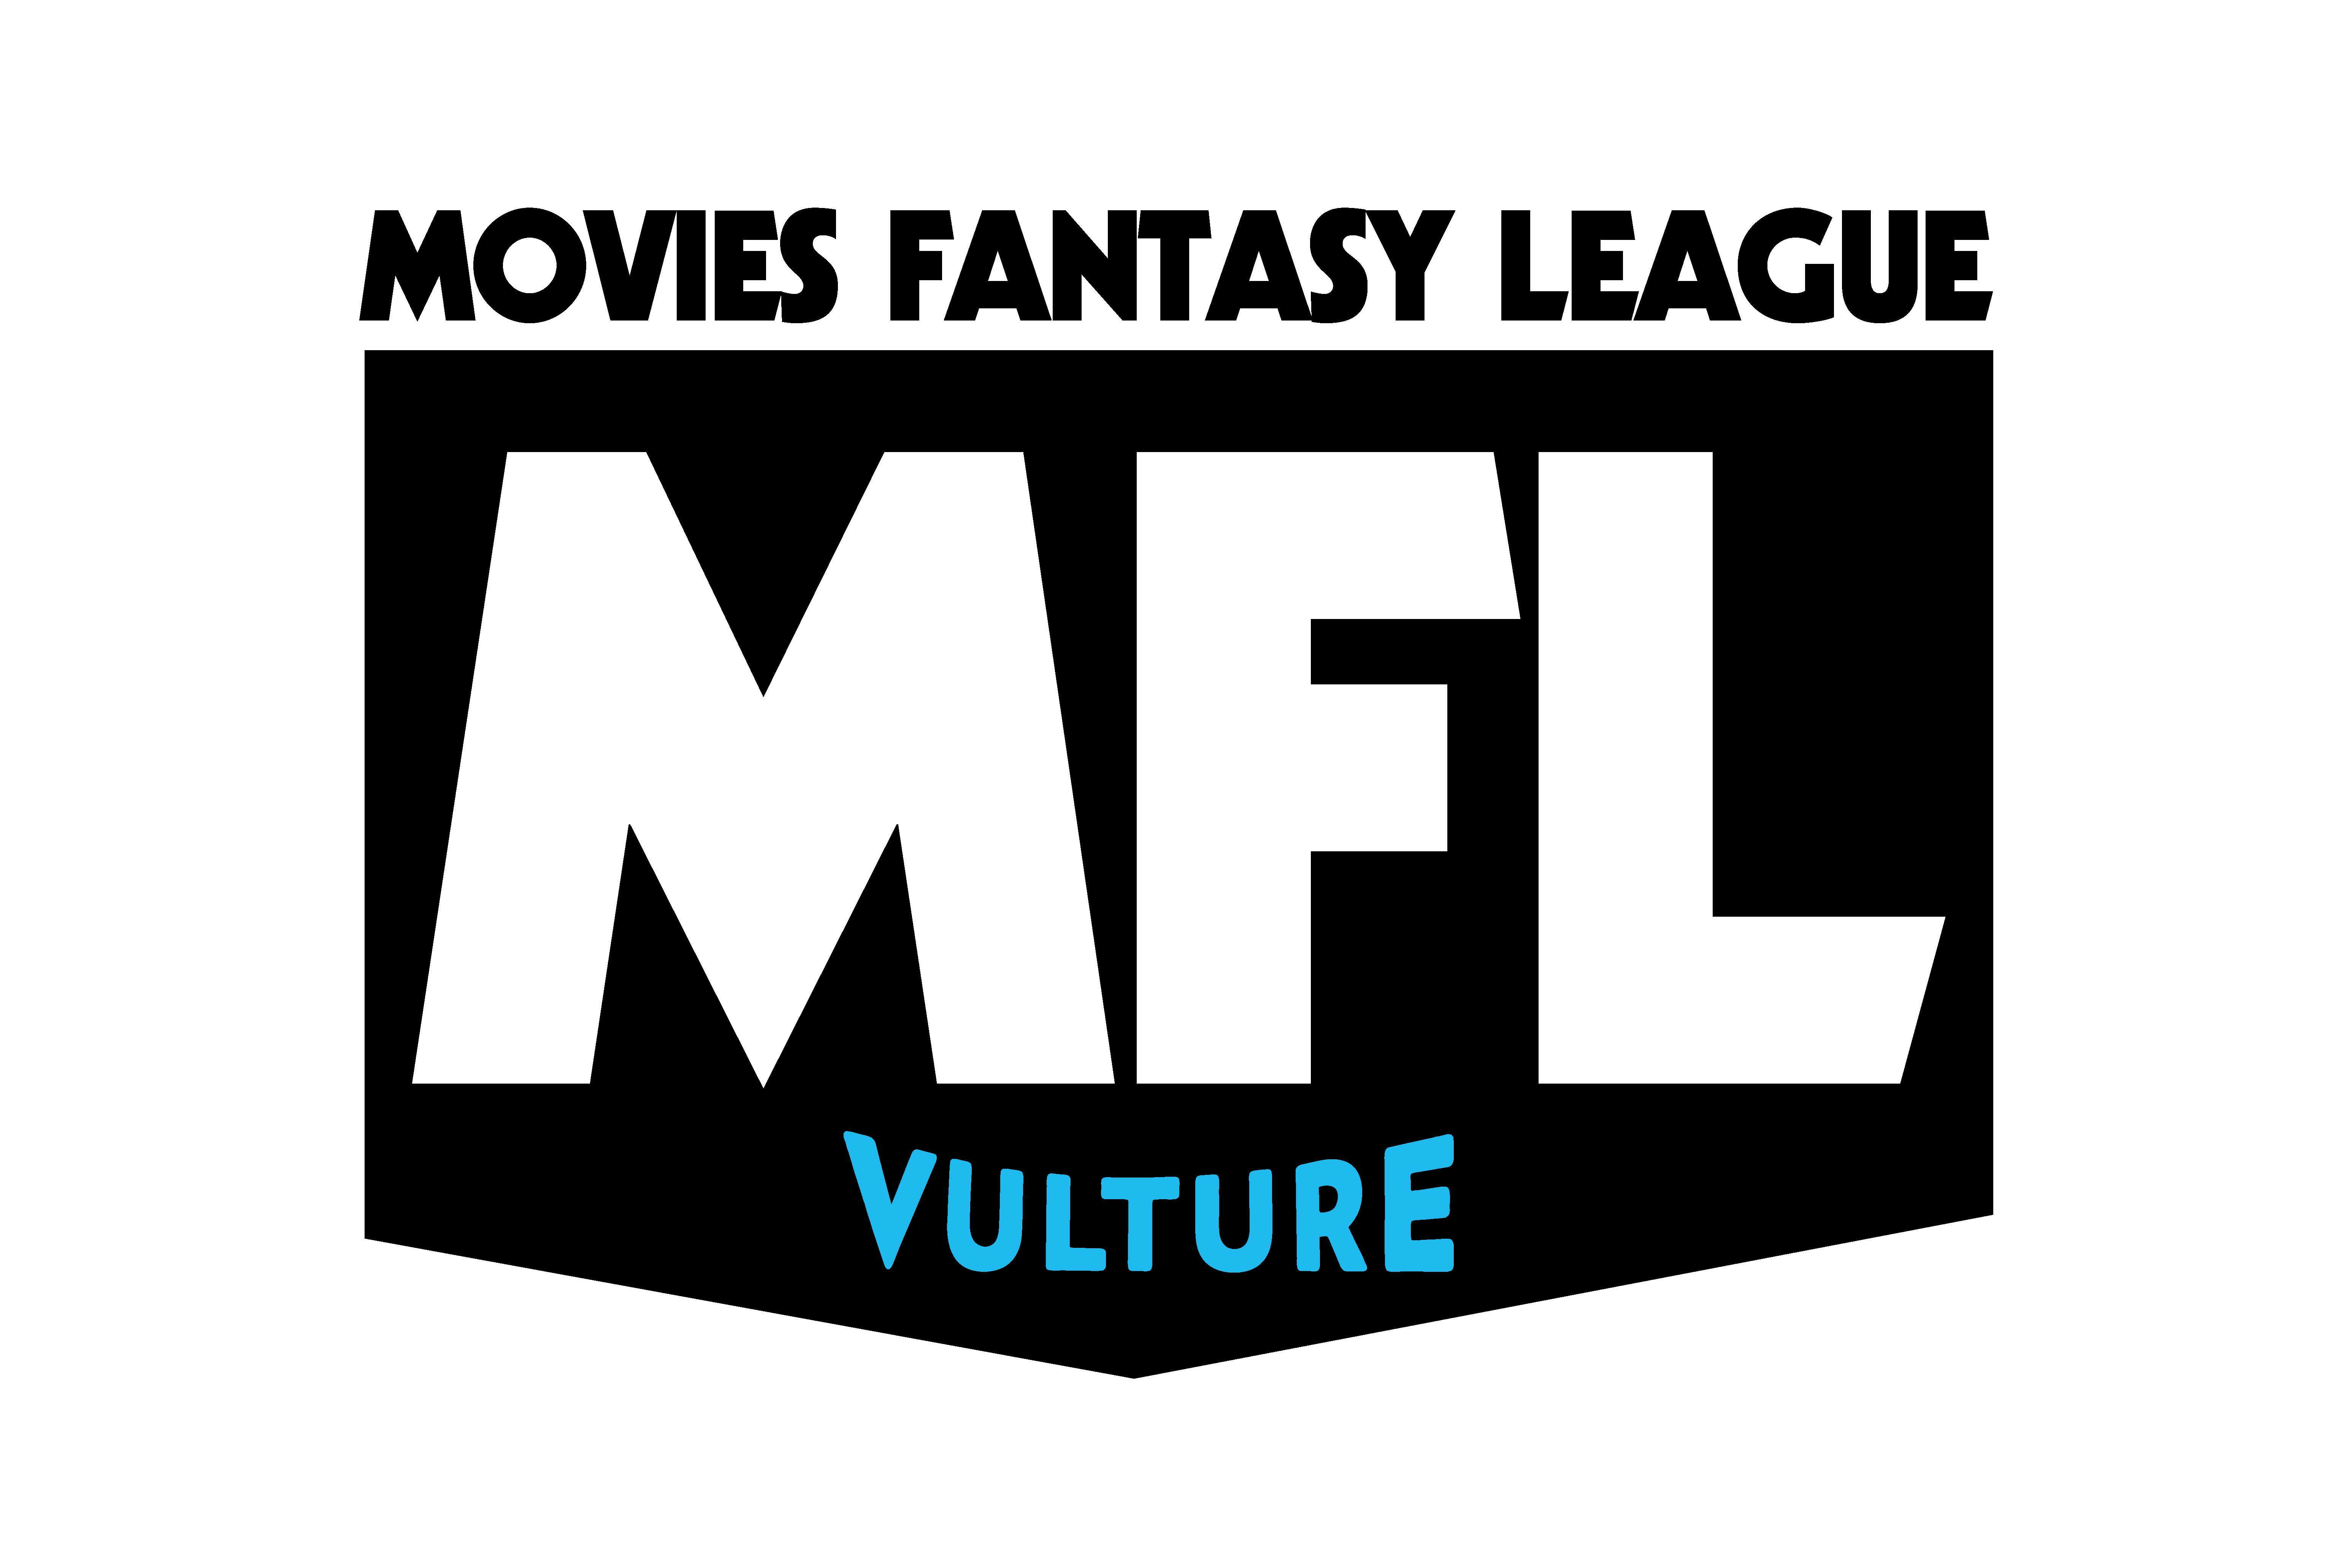 The Vulture Movies Fantasy League Is Heating Up